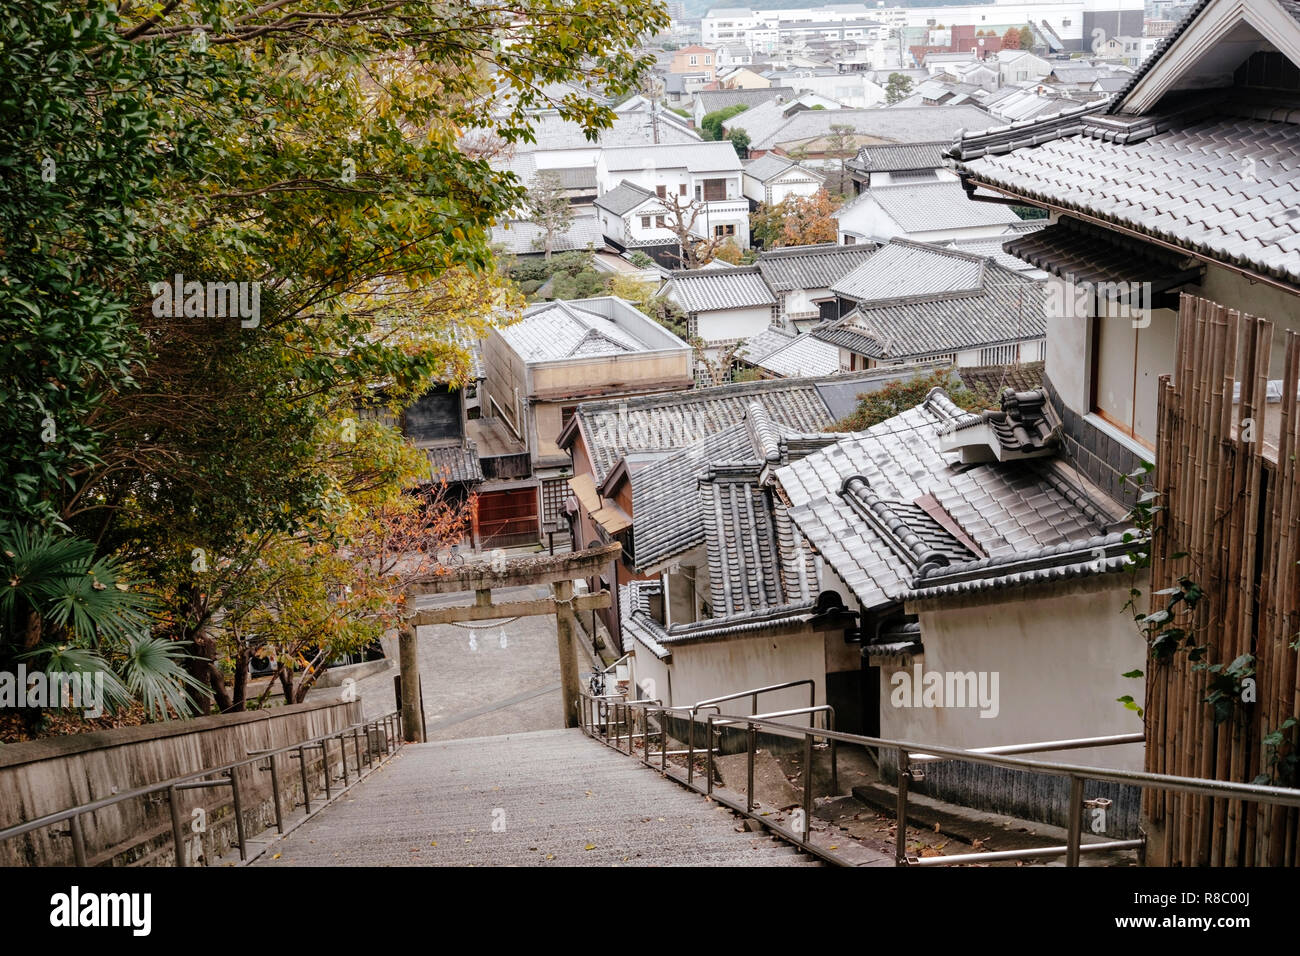 Hillside view of the Bikan historic disctrict of Kurashiki. Situated in Okayama Prefecture near the Inland Sea, the city has become famous for its int Stock Photo